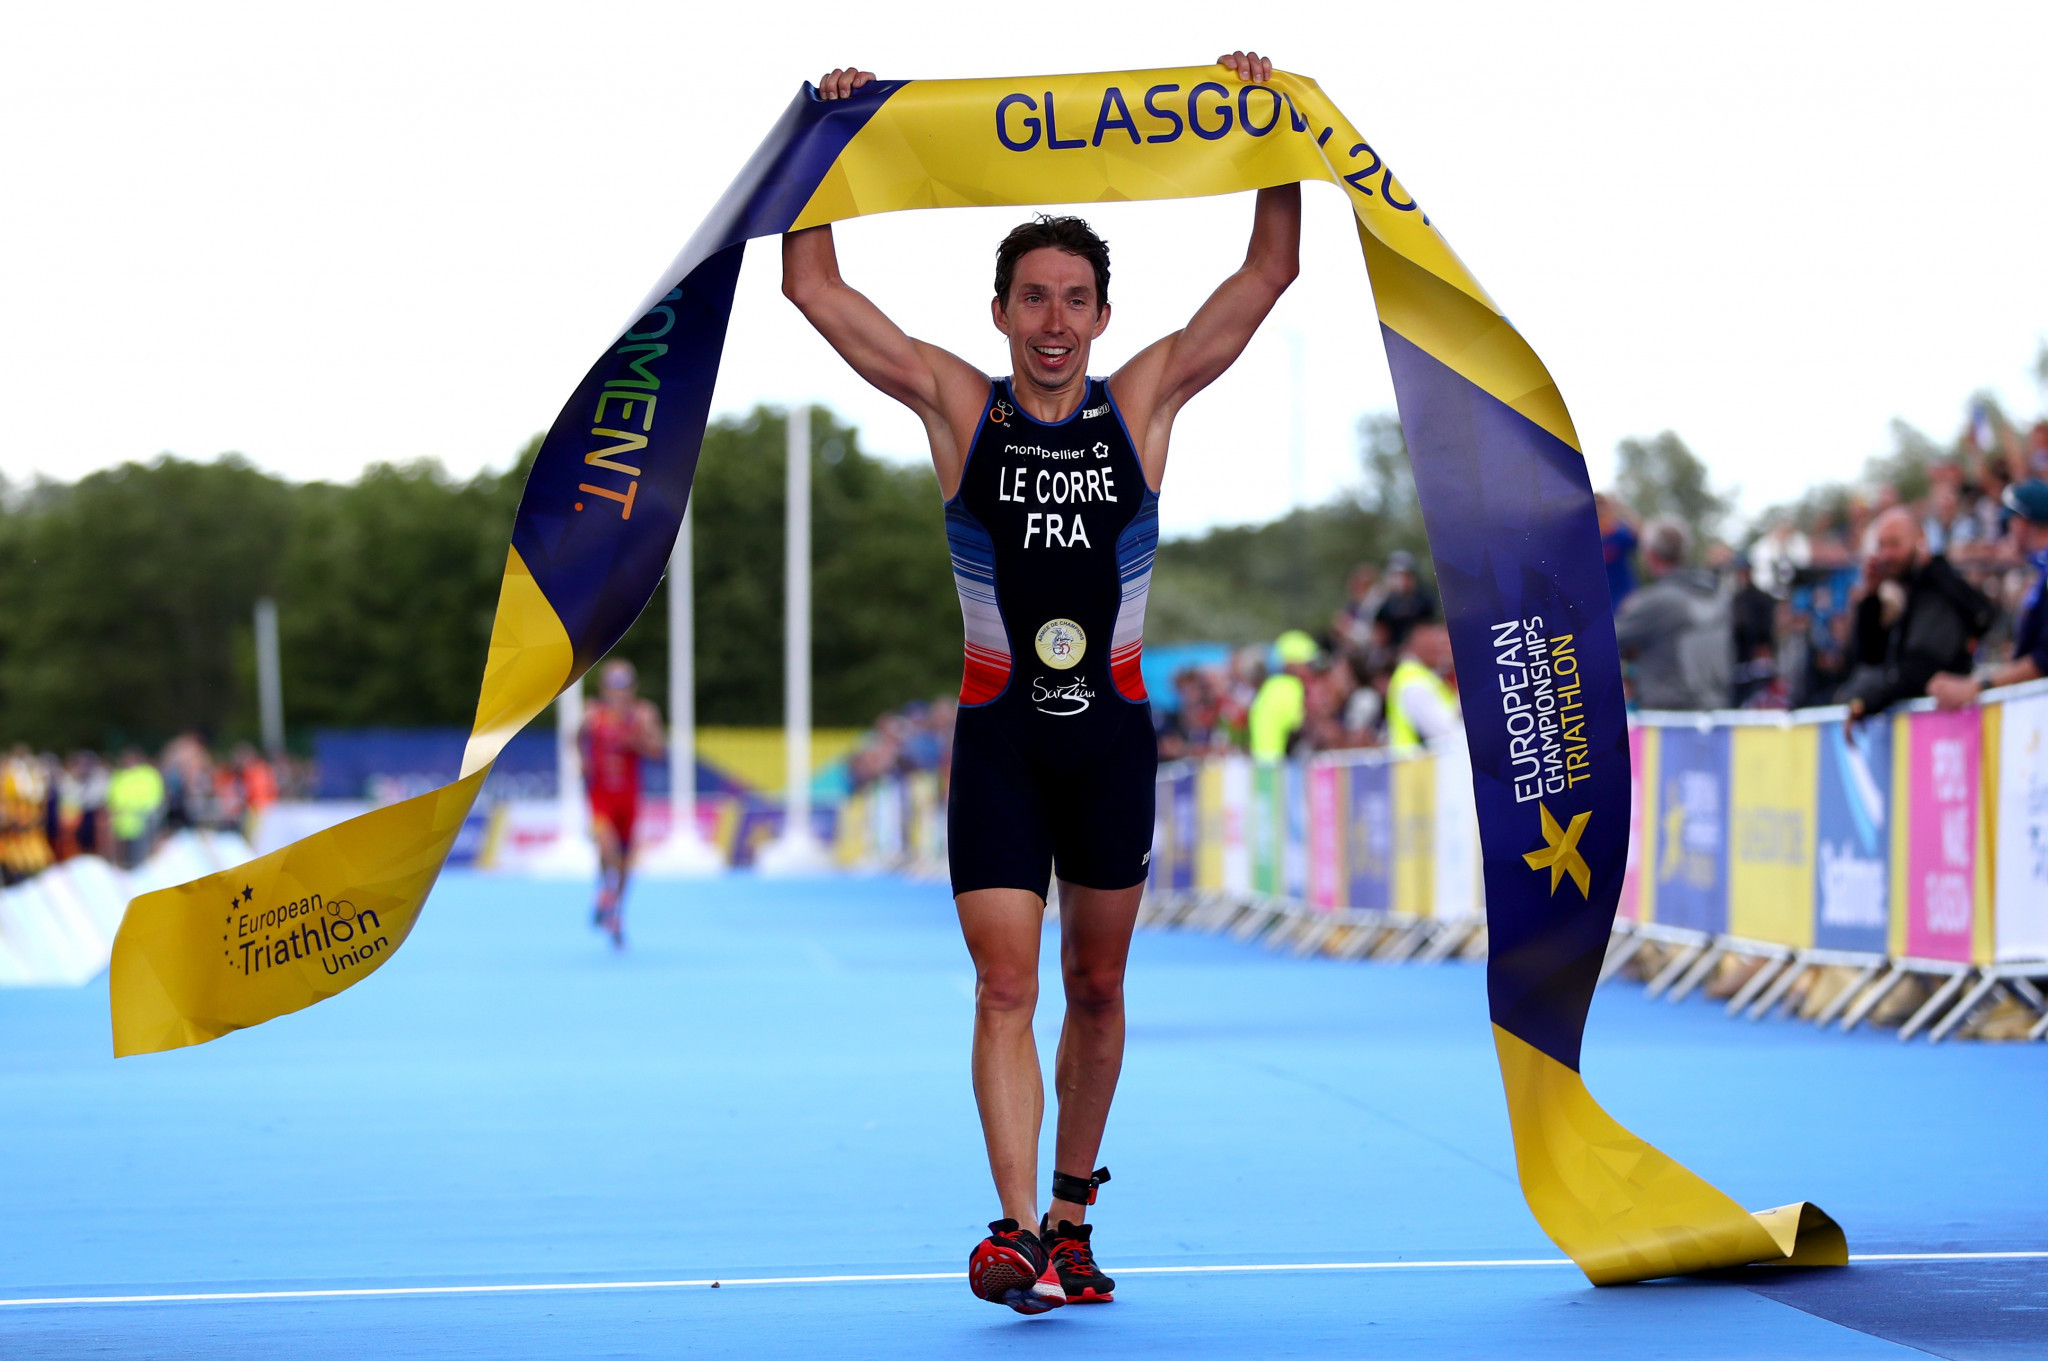 Over in Glasgow, France's Pierre Le Corre came out on top in the men's triathlon ©Getty Images